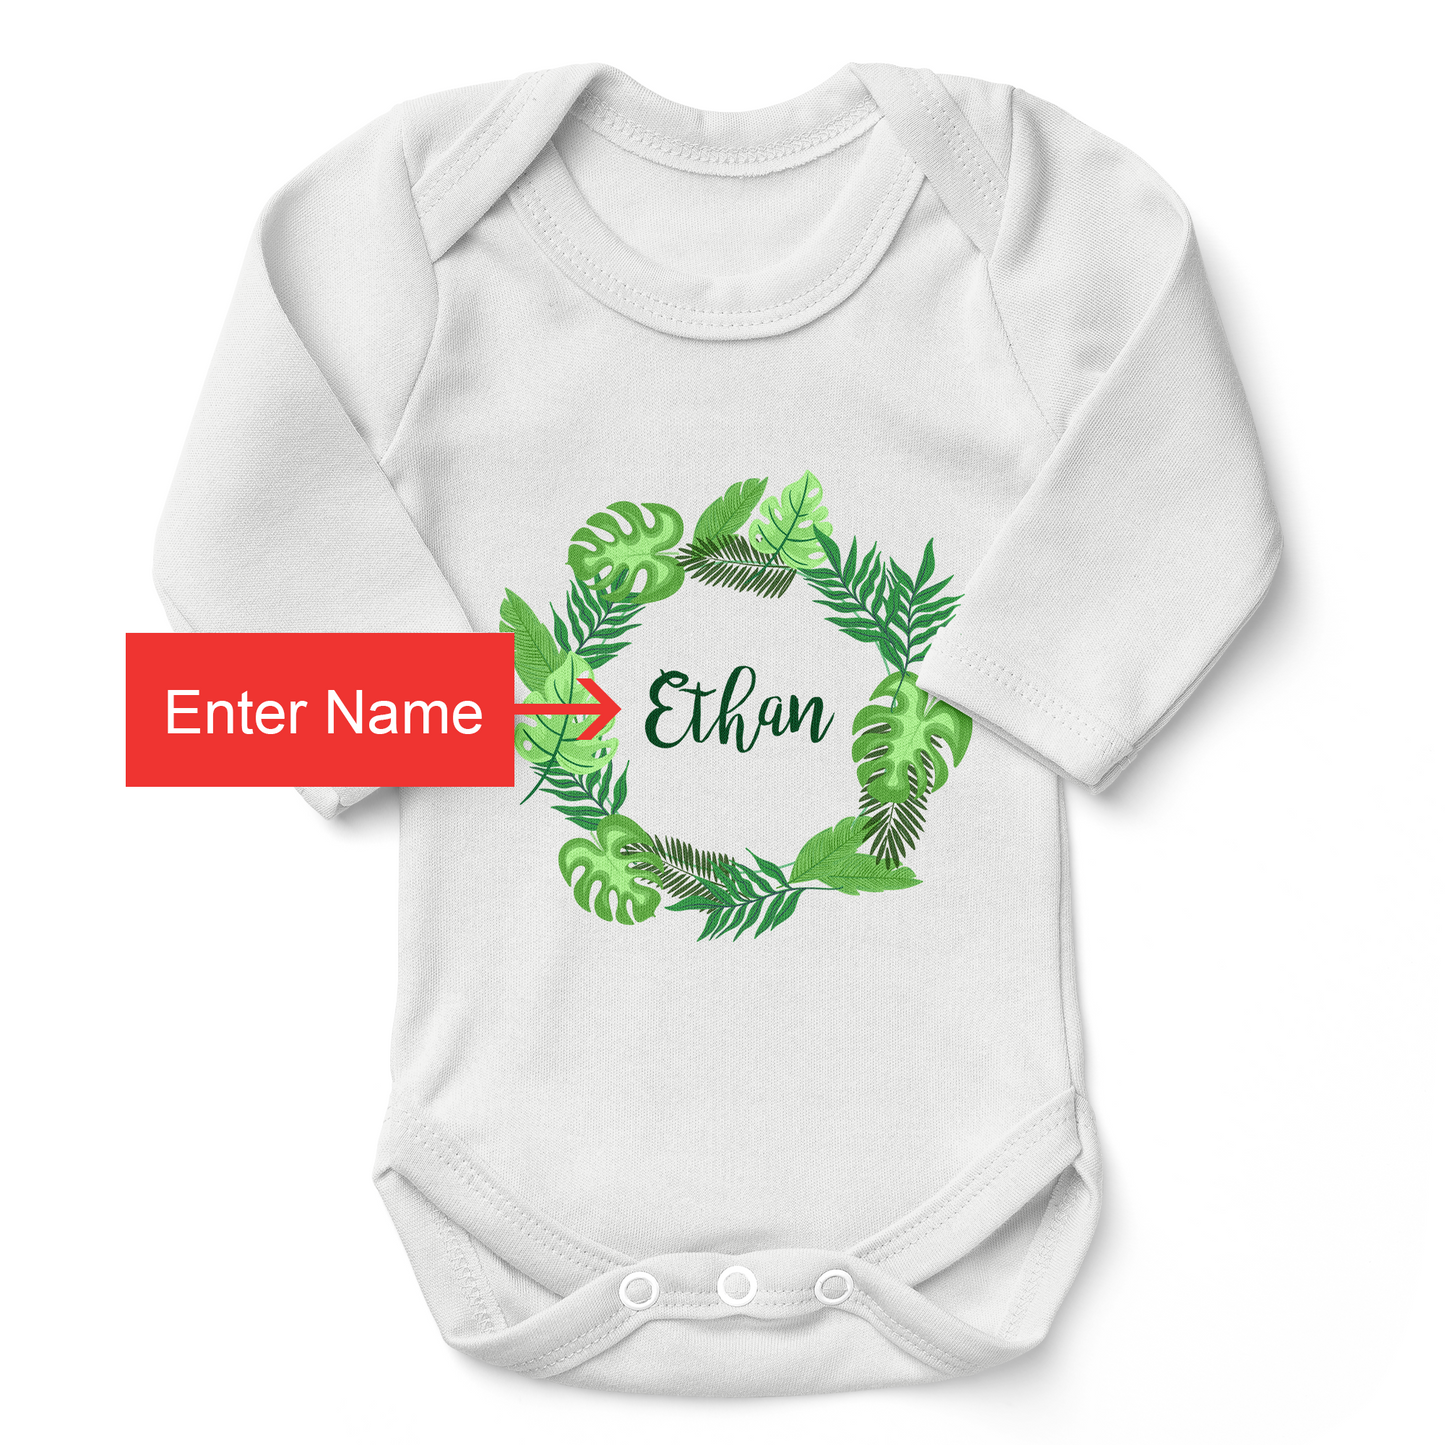 Personalized Organic Baby Bodysuit - Tropical Leaves (White / Long Sleeve)